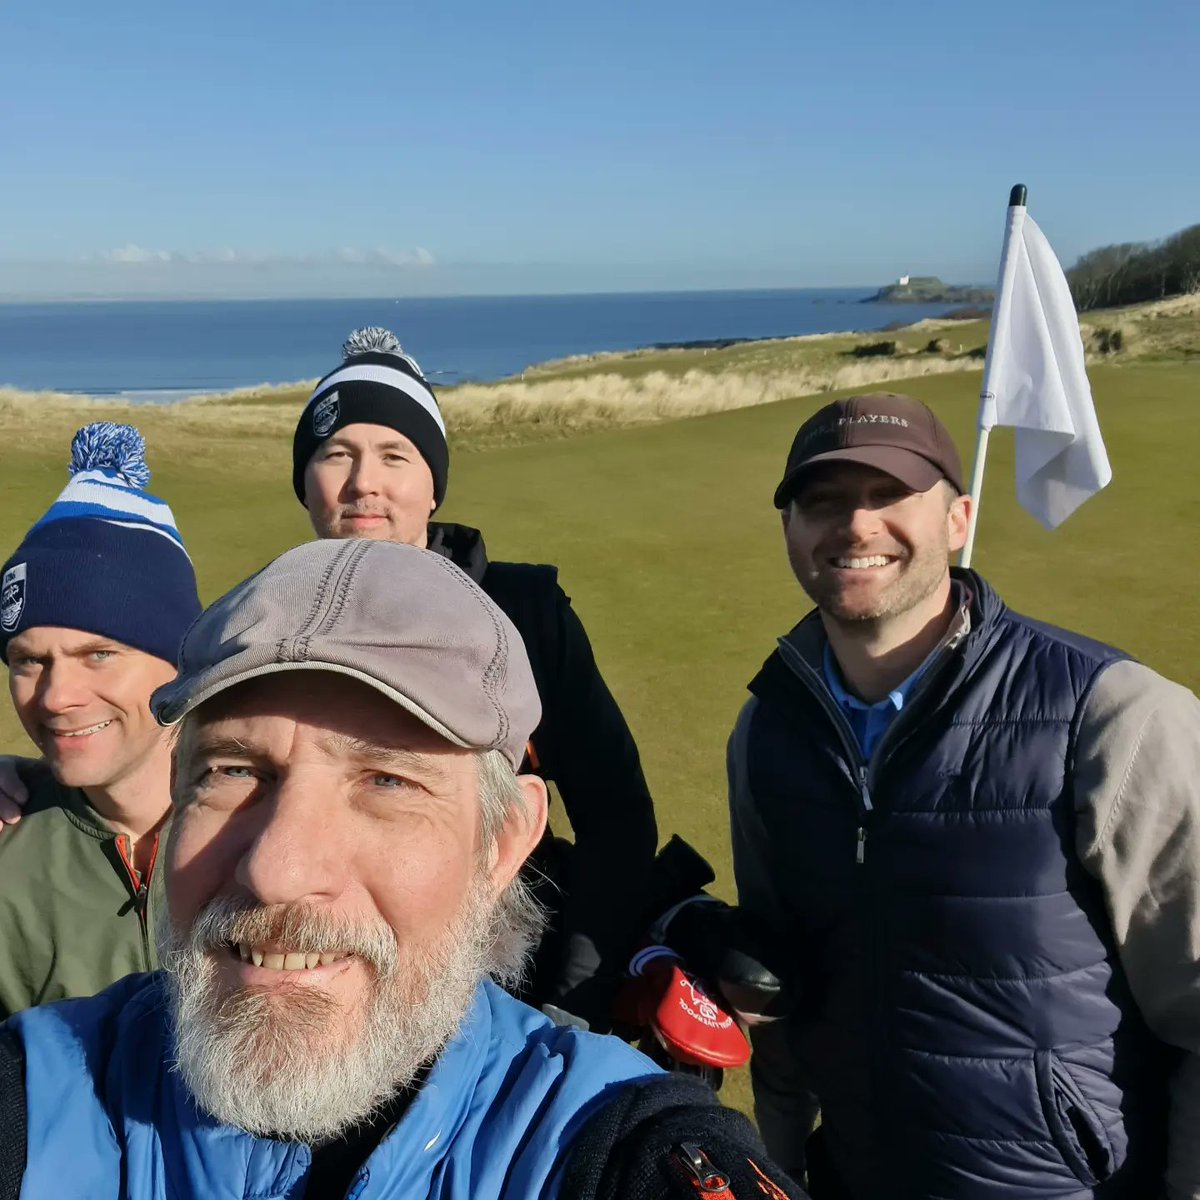 Great to have @shankingshots and friends up on @Scotgolfcoast  playing golf.  Quick dash around @therenaissanceclub before @kilspindiegolf .  Thanks to @thelinksdiary and @wheregolfbegan for showing the way #DucksInn 
@malcolmtheduck enjoyed hosting